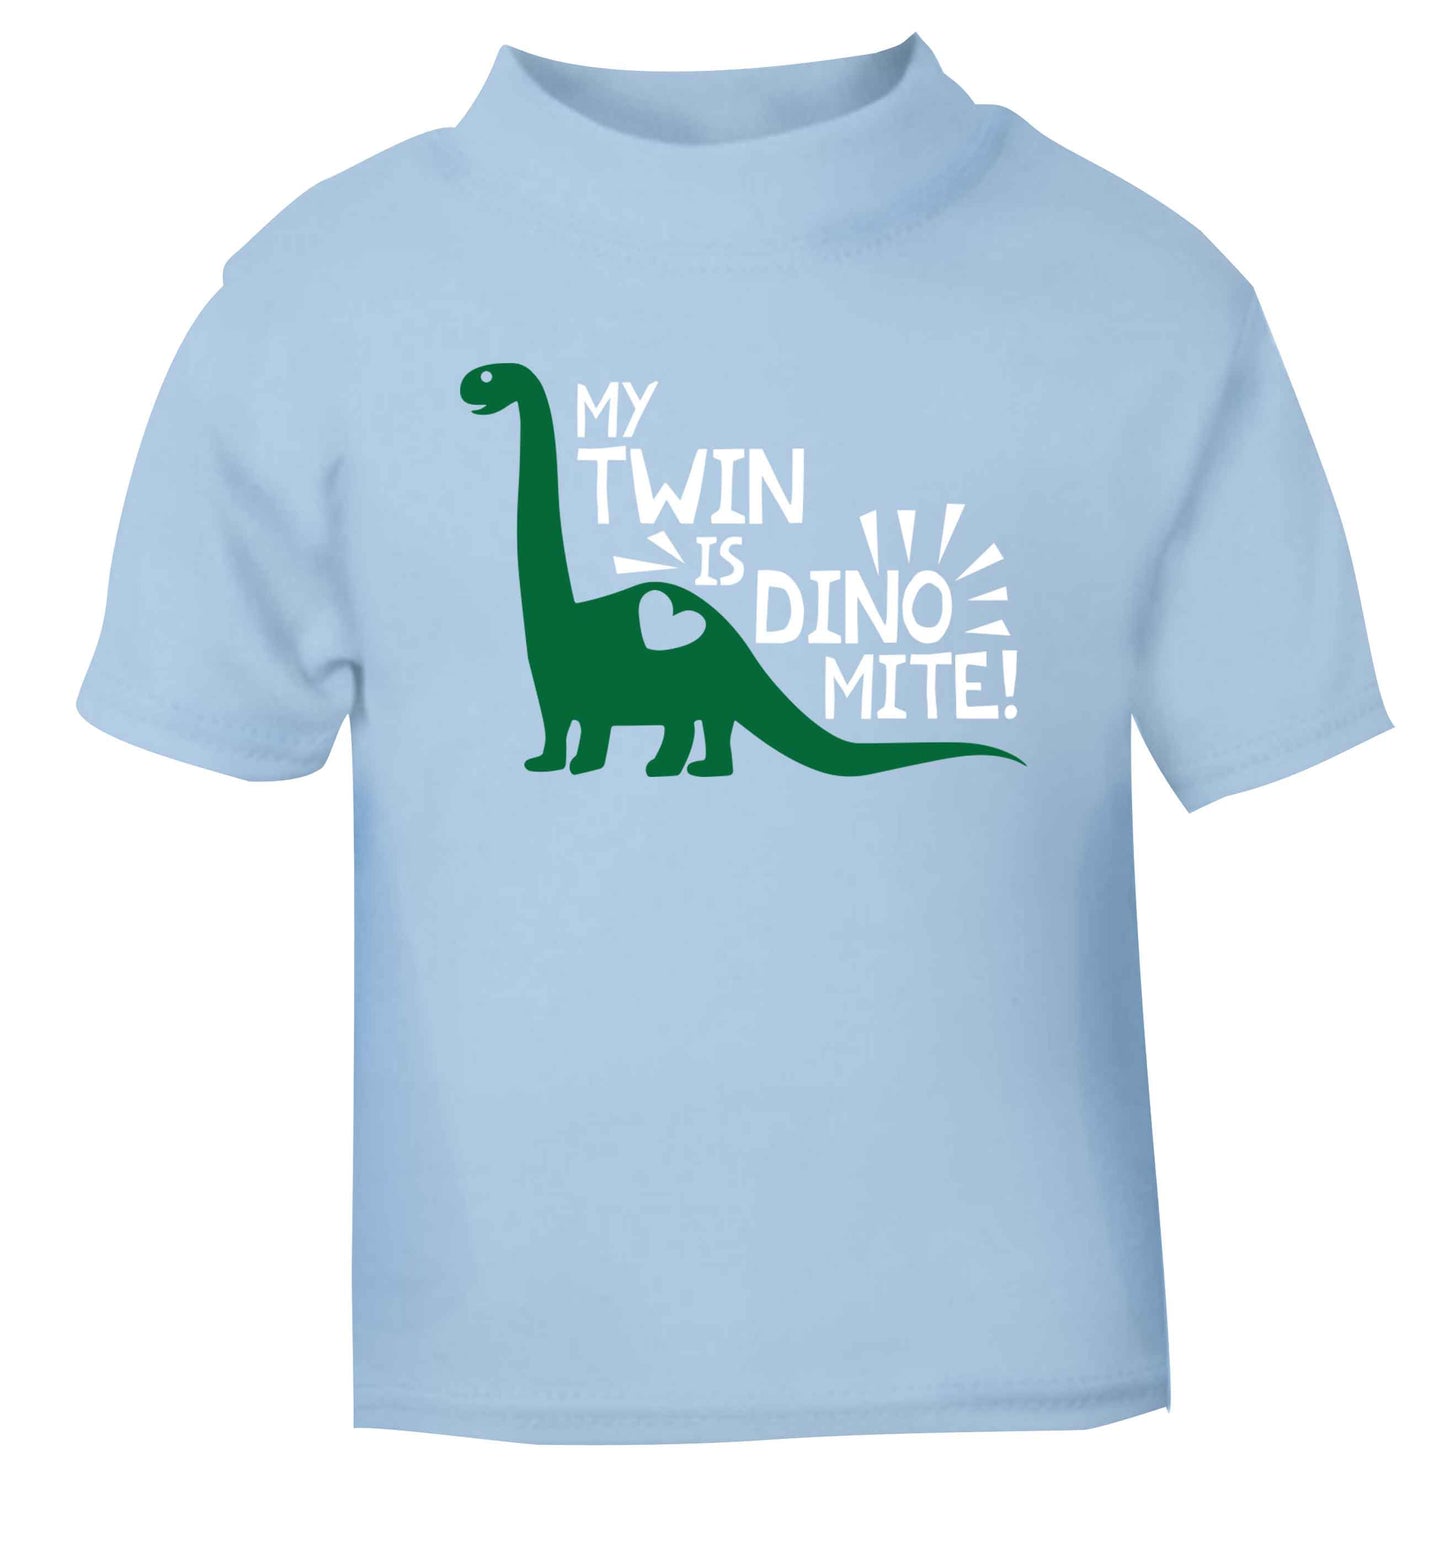 My twin is dinomite! light blue Baby Toddler Tshirt 2 Years